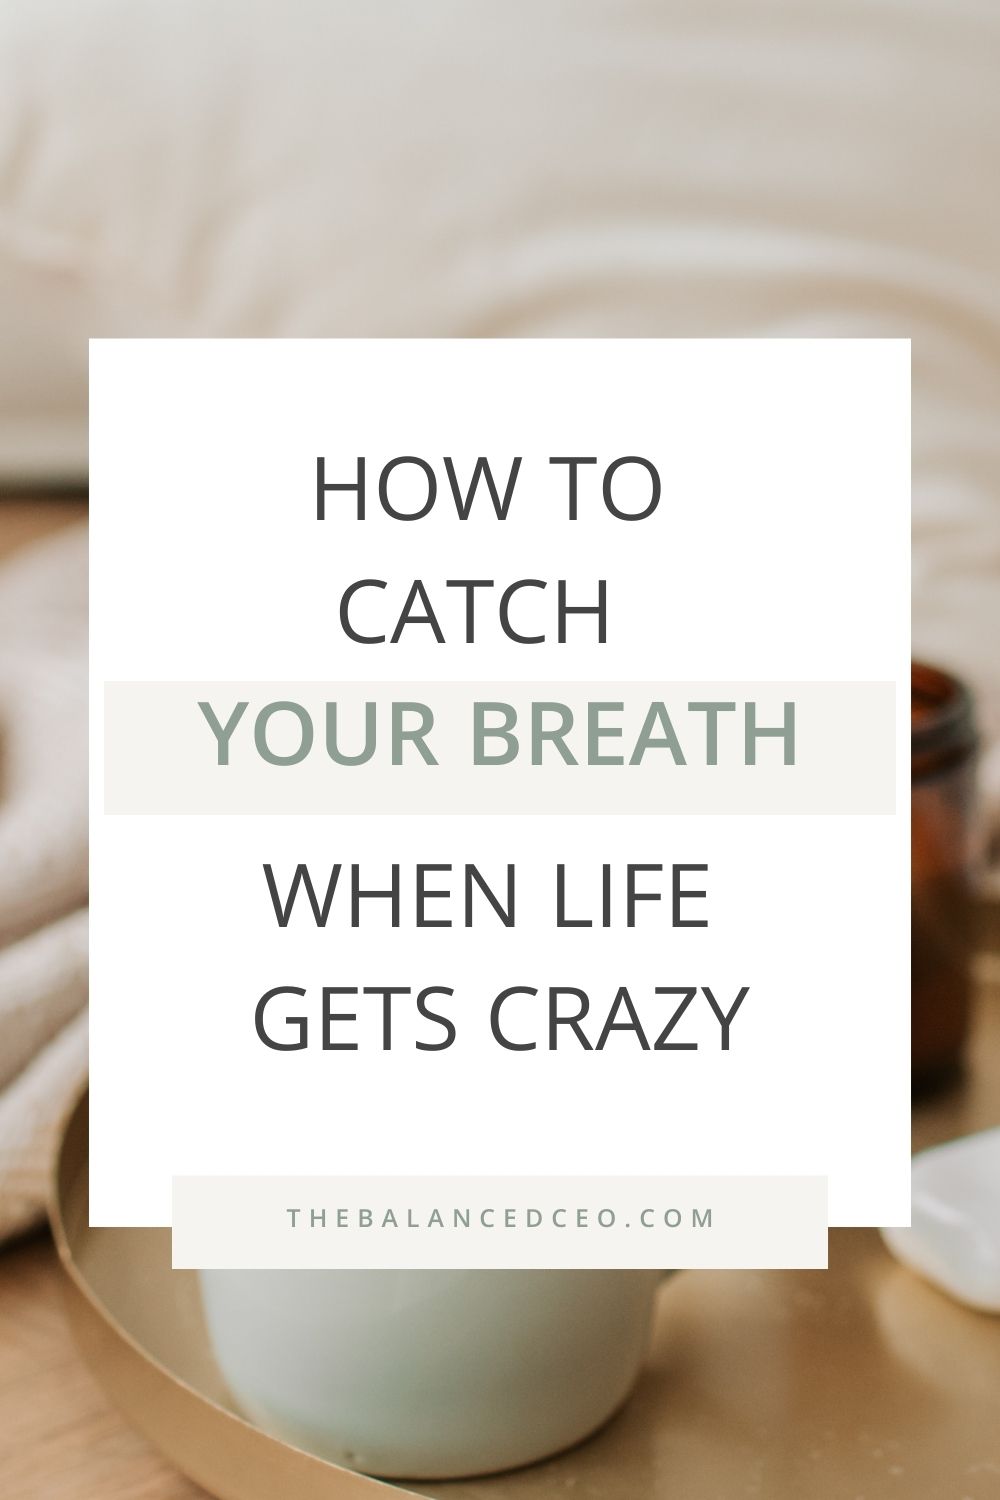 How to Catch Your Breath When Life Gets Crazy